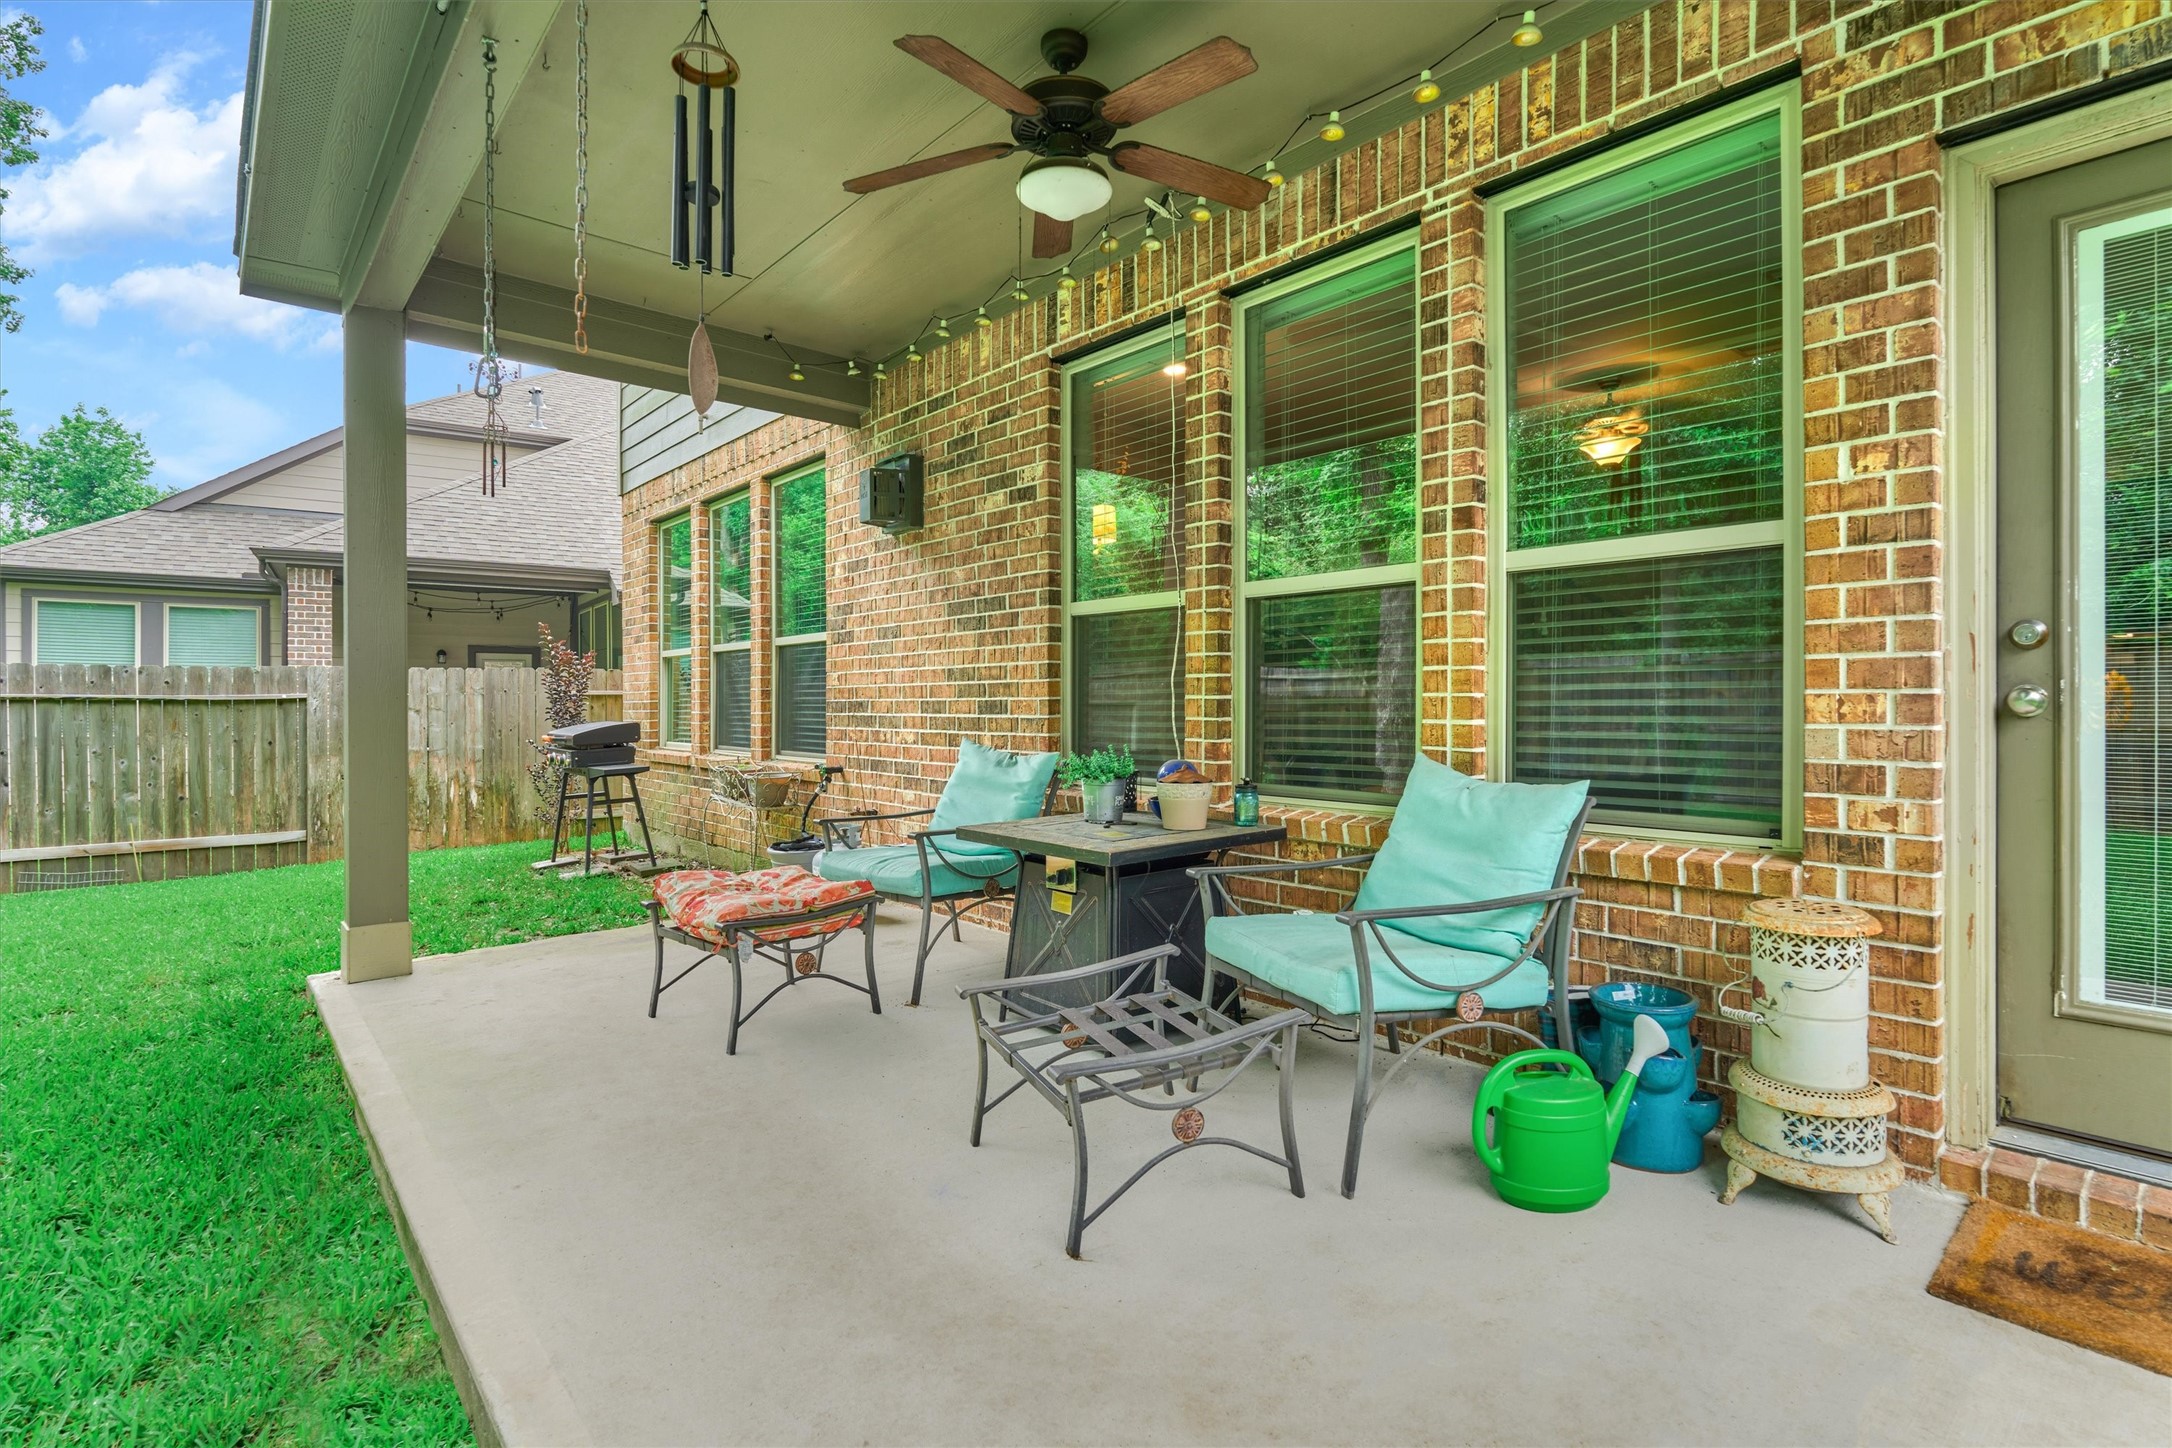 You'll enjoy sitting on your patio with this serene back yard view. Call today for your private viewing!
